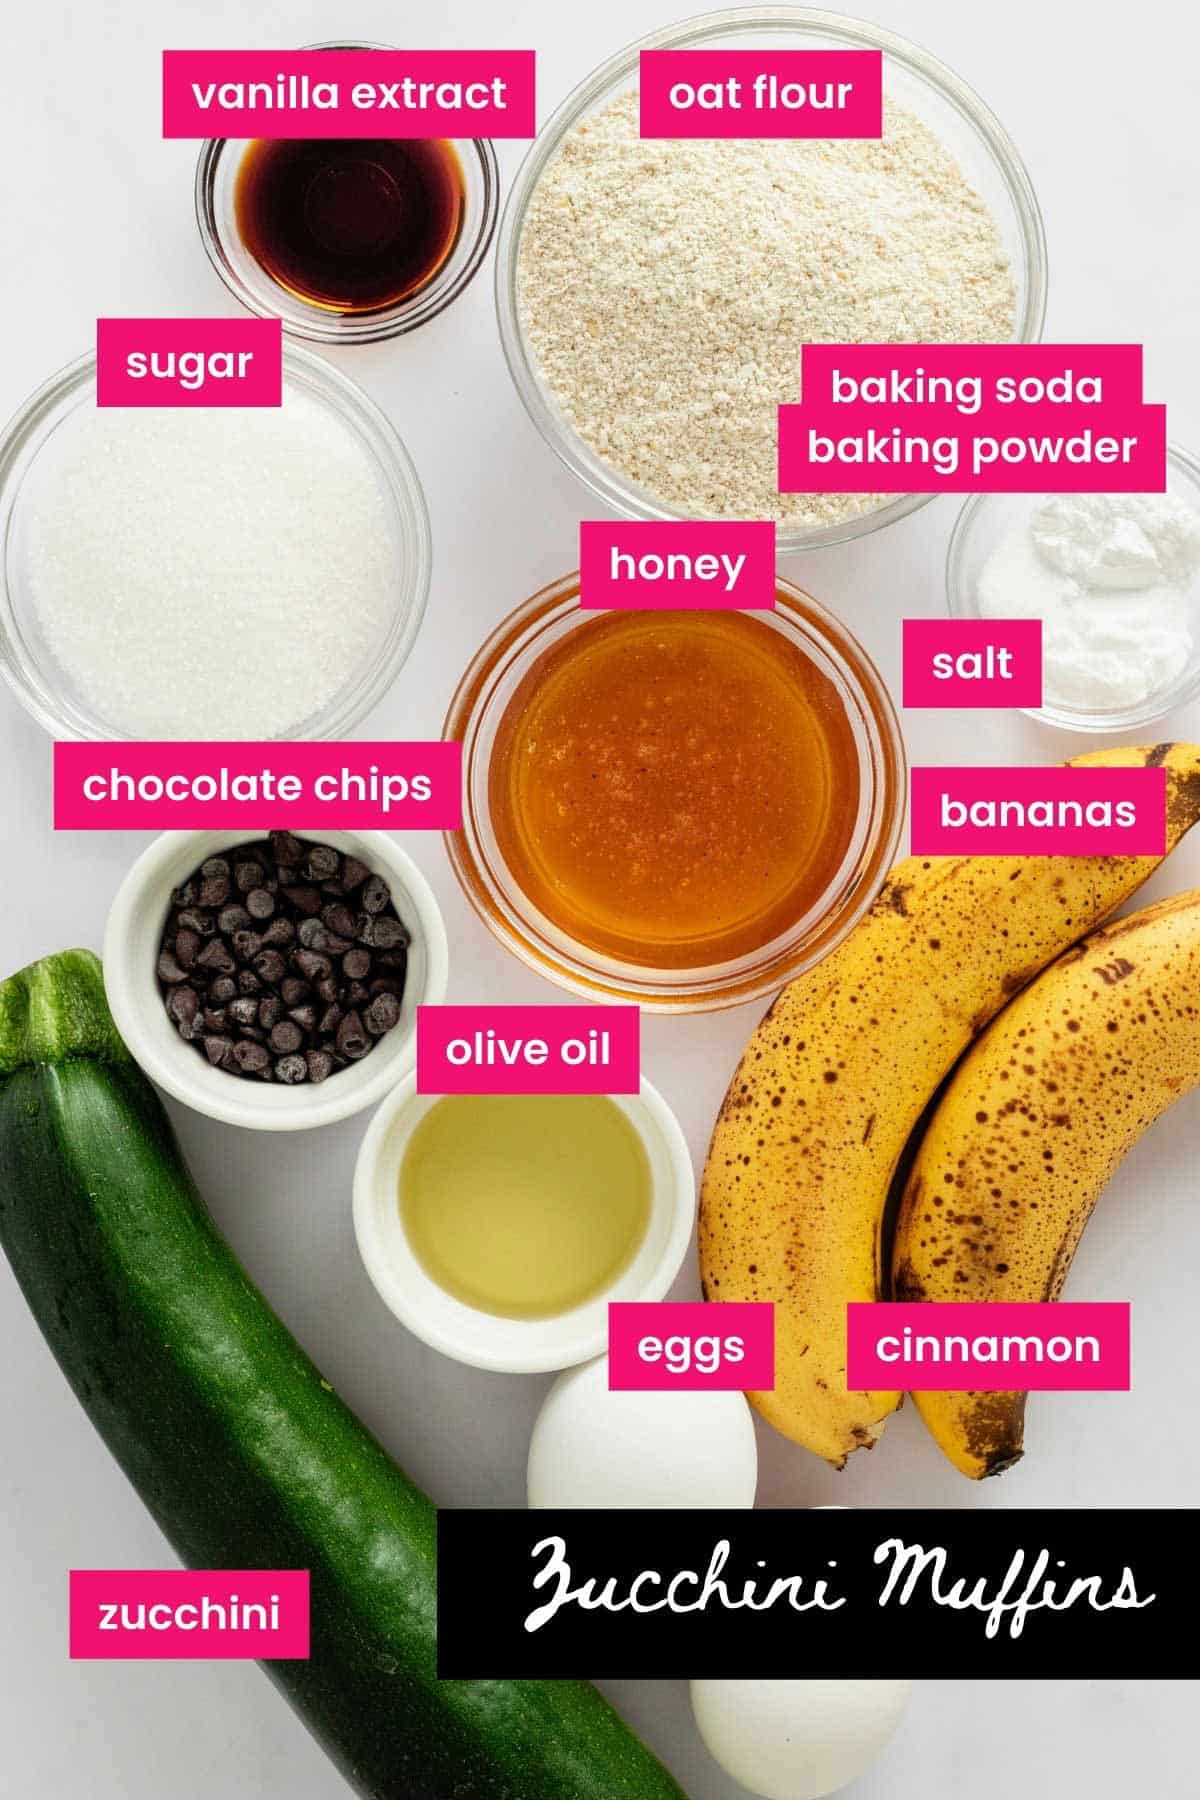 ingredients for healthy zucchini muffins.